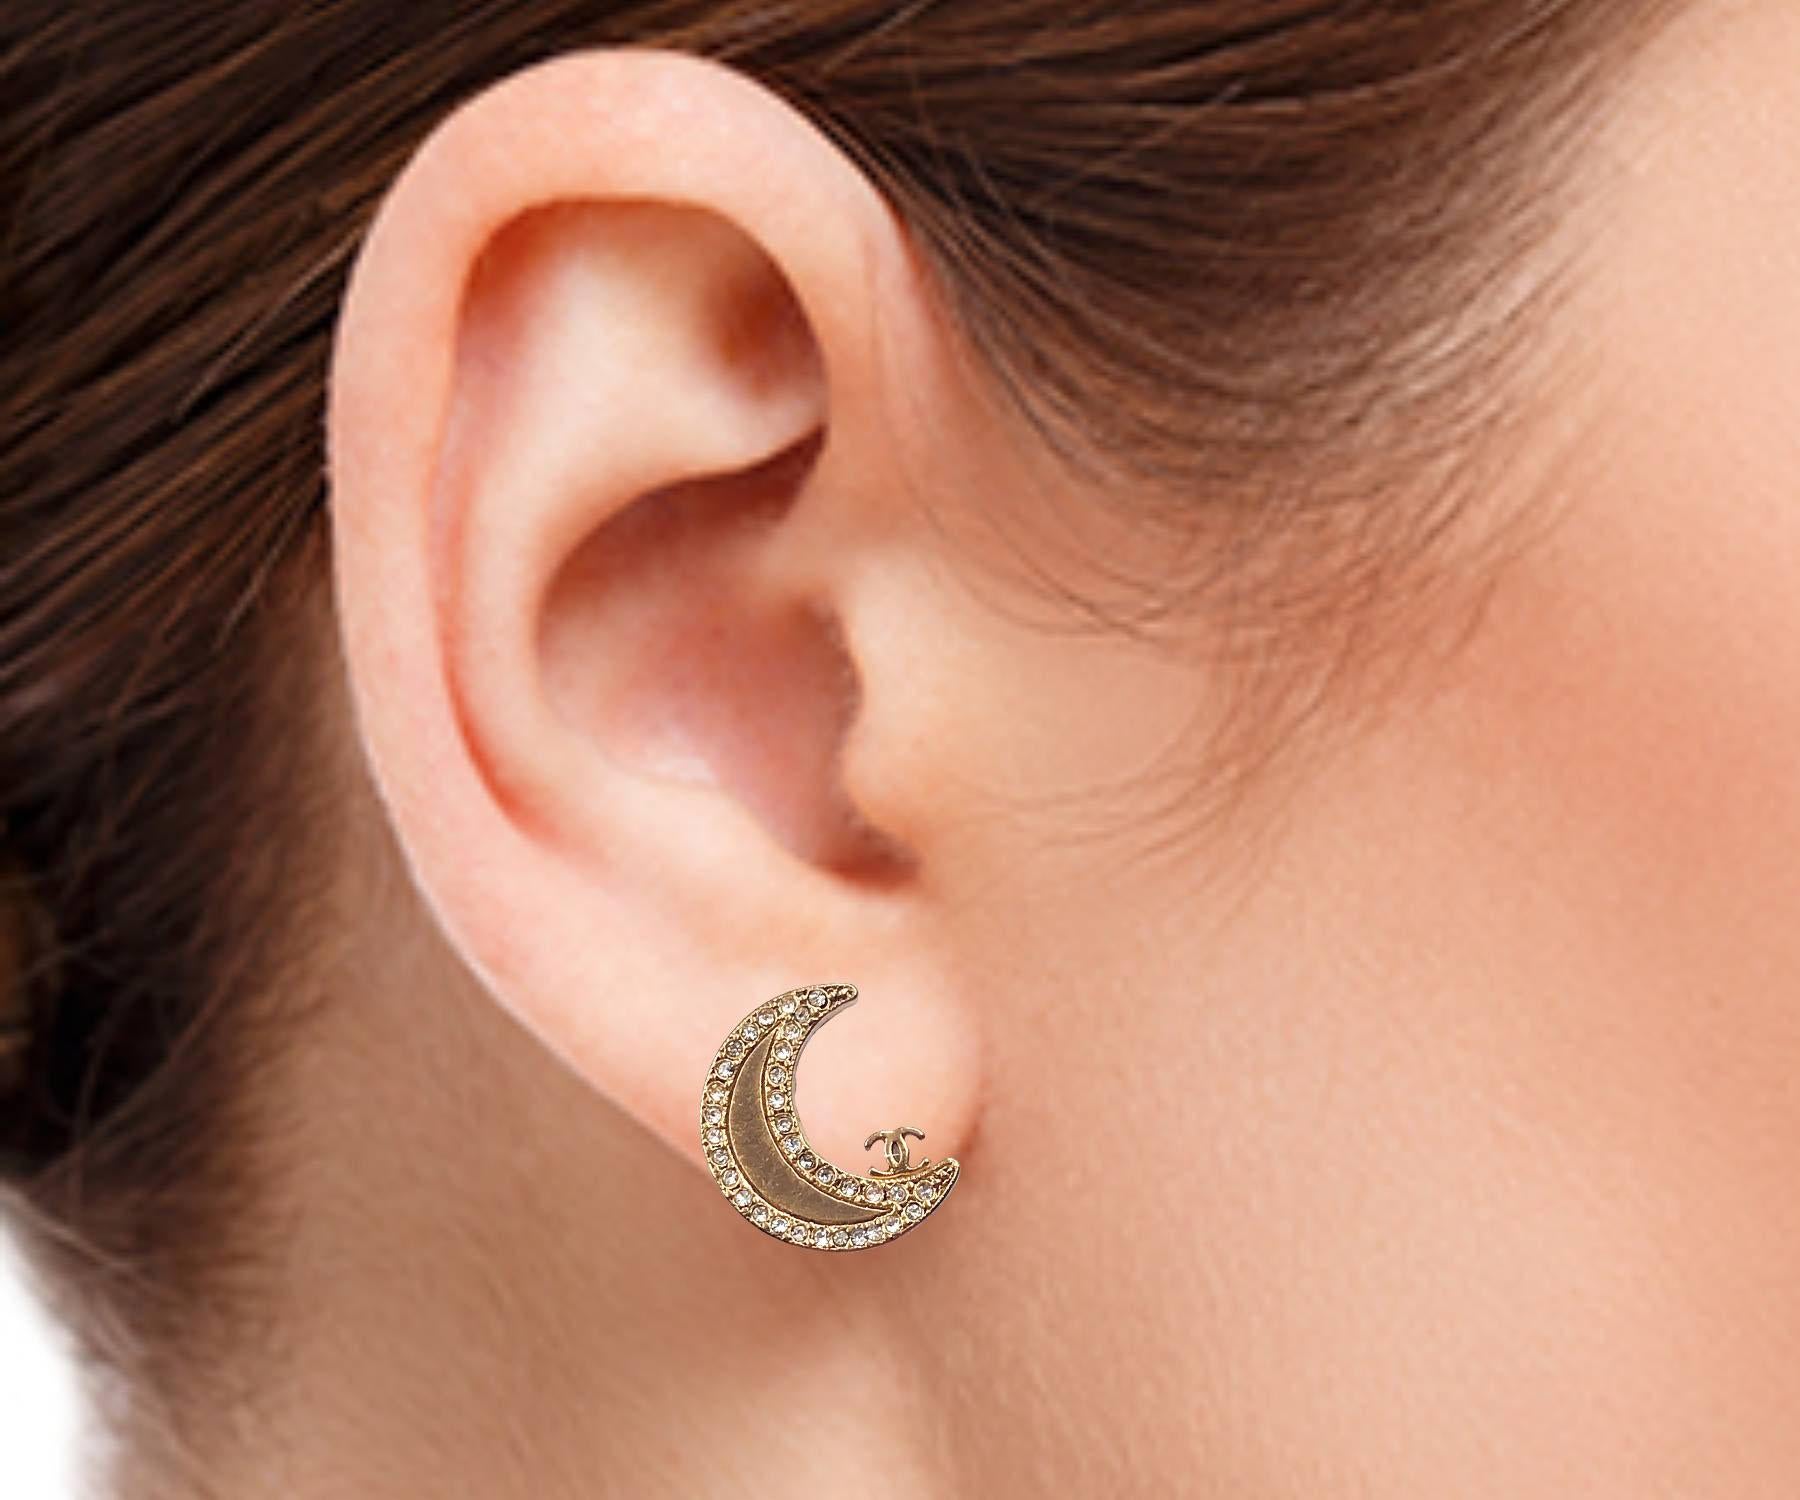 Chanel Rare Gold CC Moon Crystal Clip on Earrings In Excellent Condition For Sale In Pasadena, CA